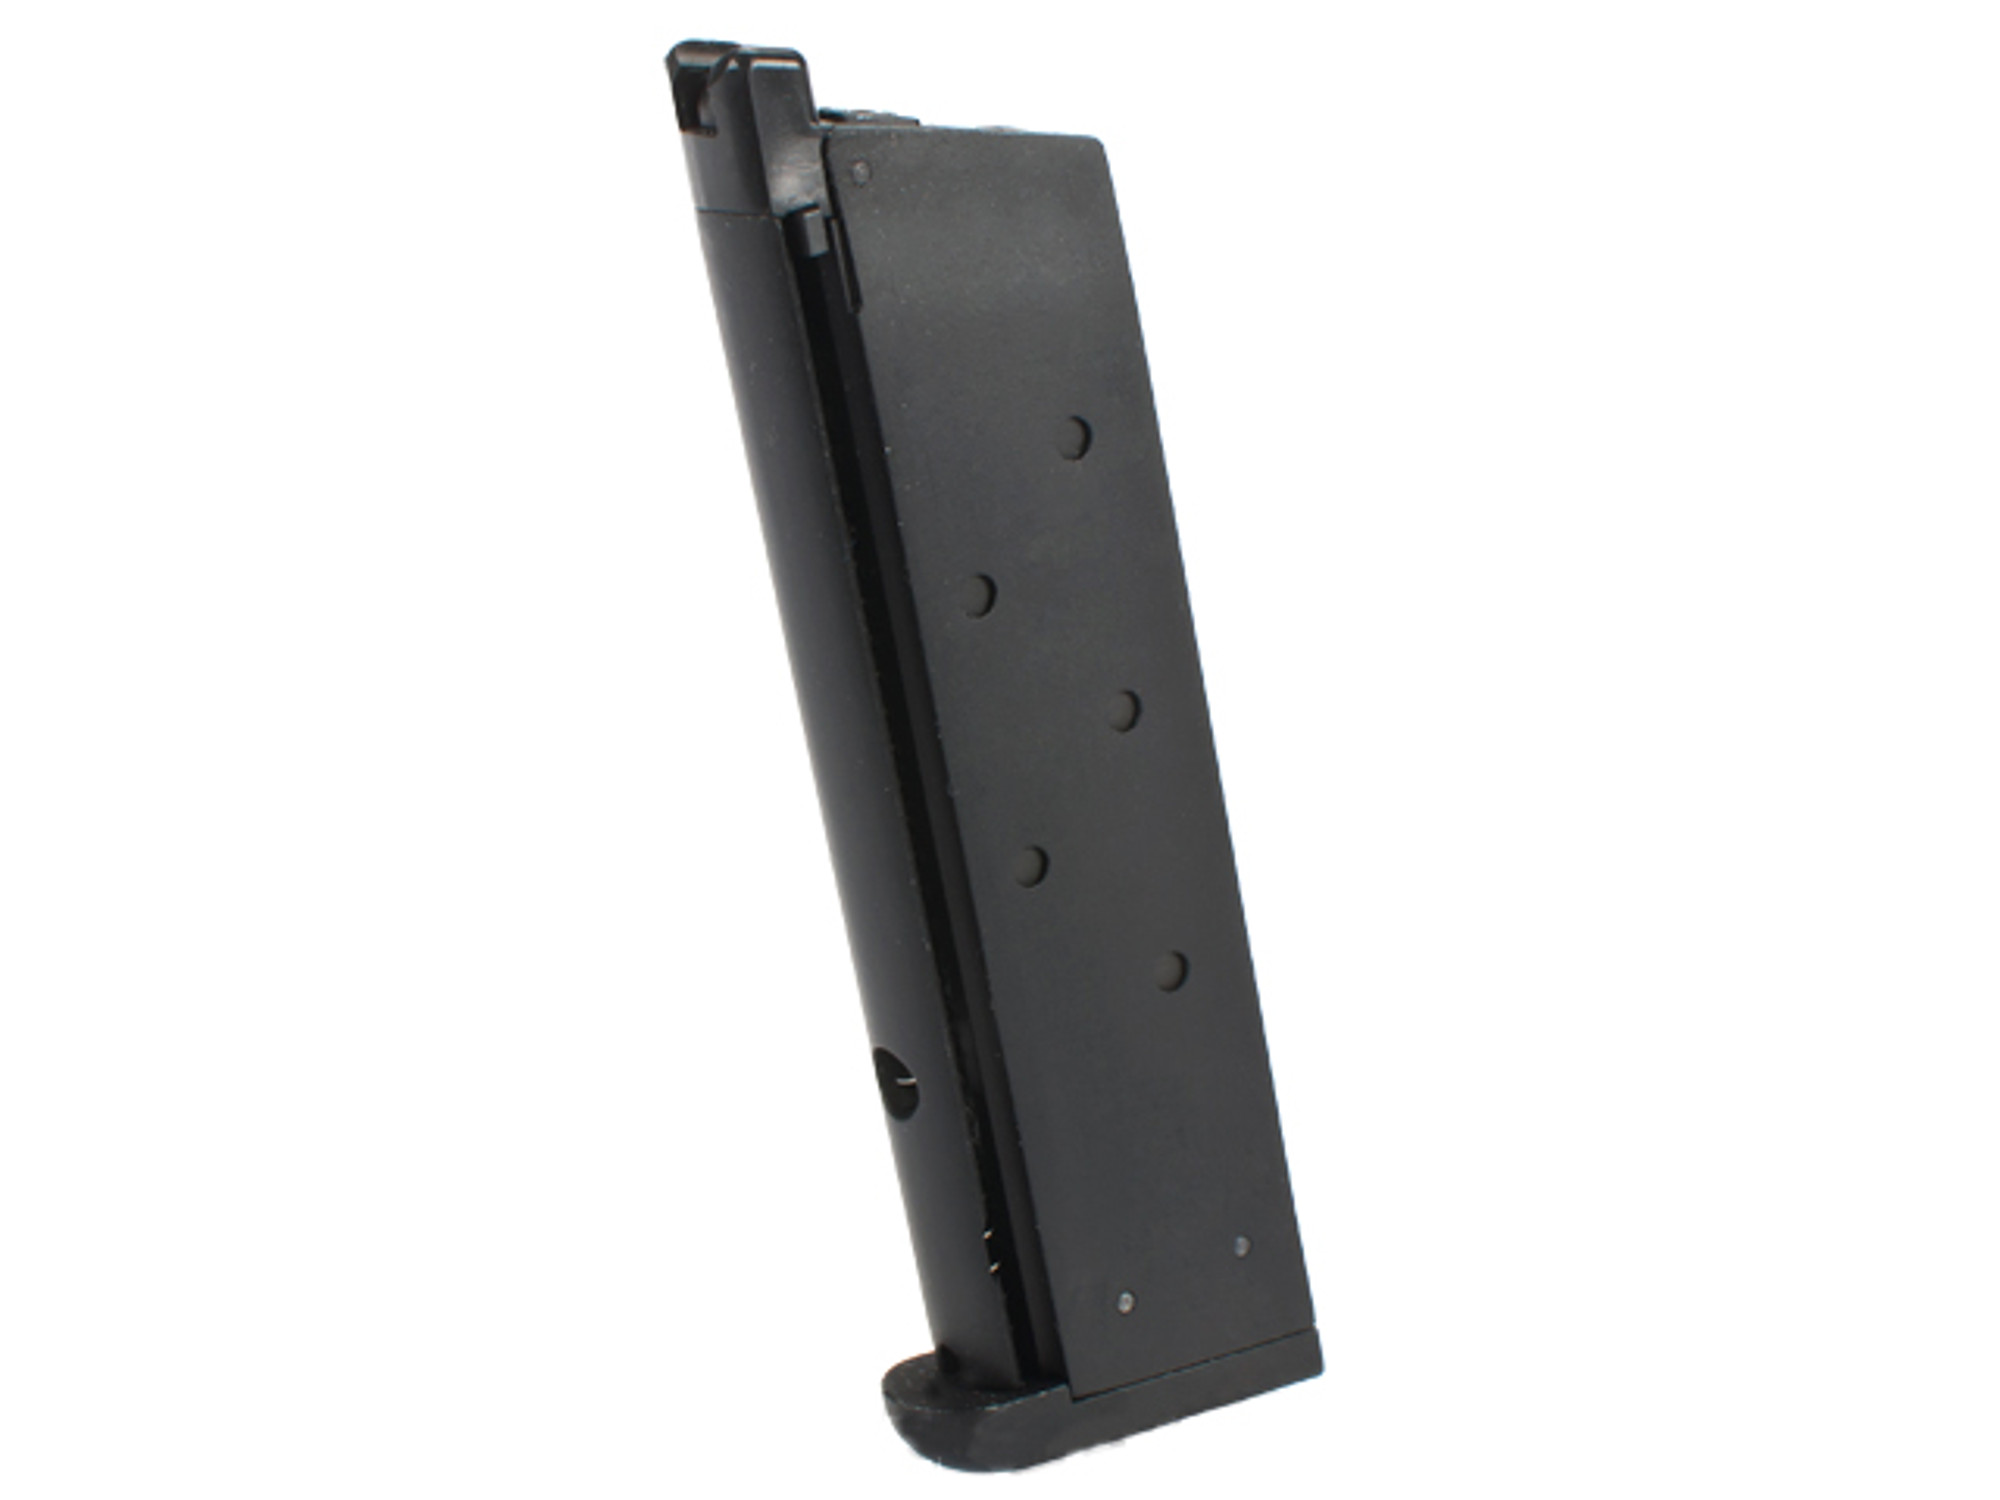 WE-Tech 16rd Magazine for WE 1911 Series Airsoft GBB Pistols (Color: Black)